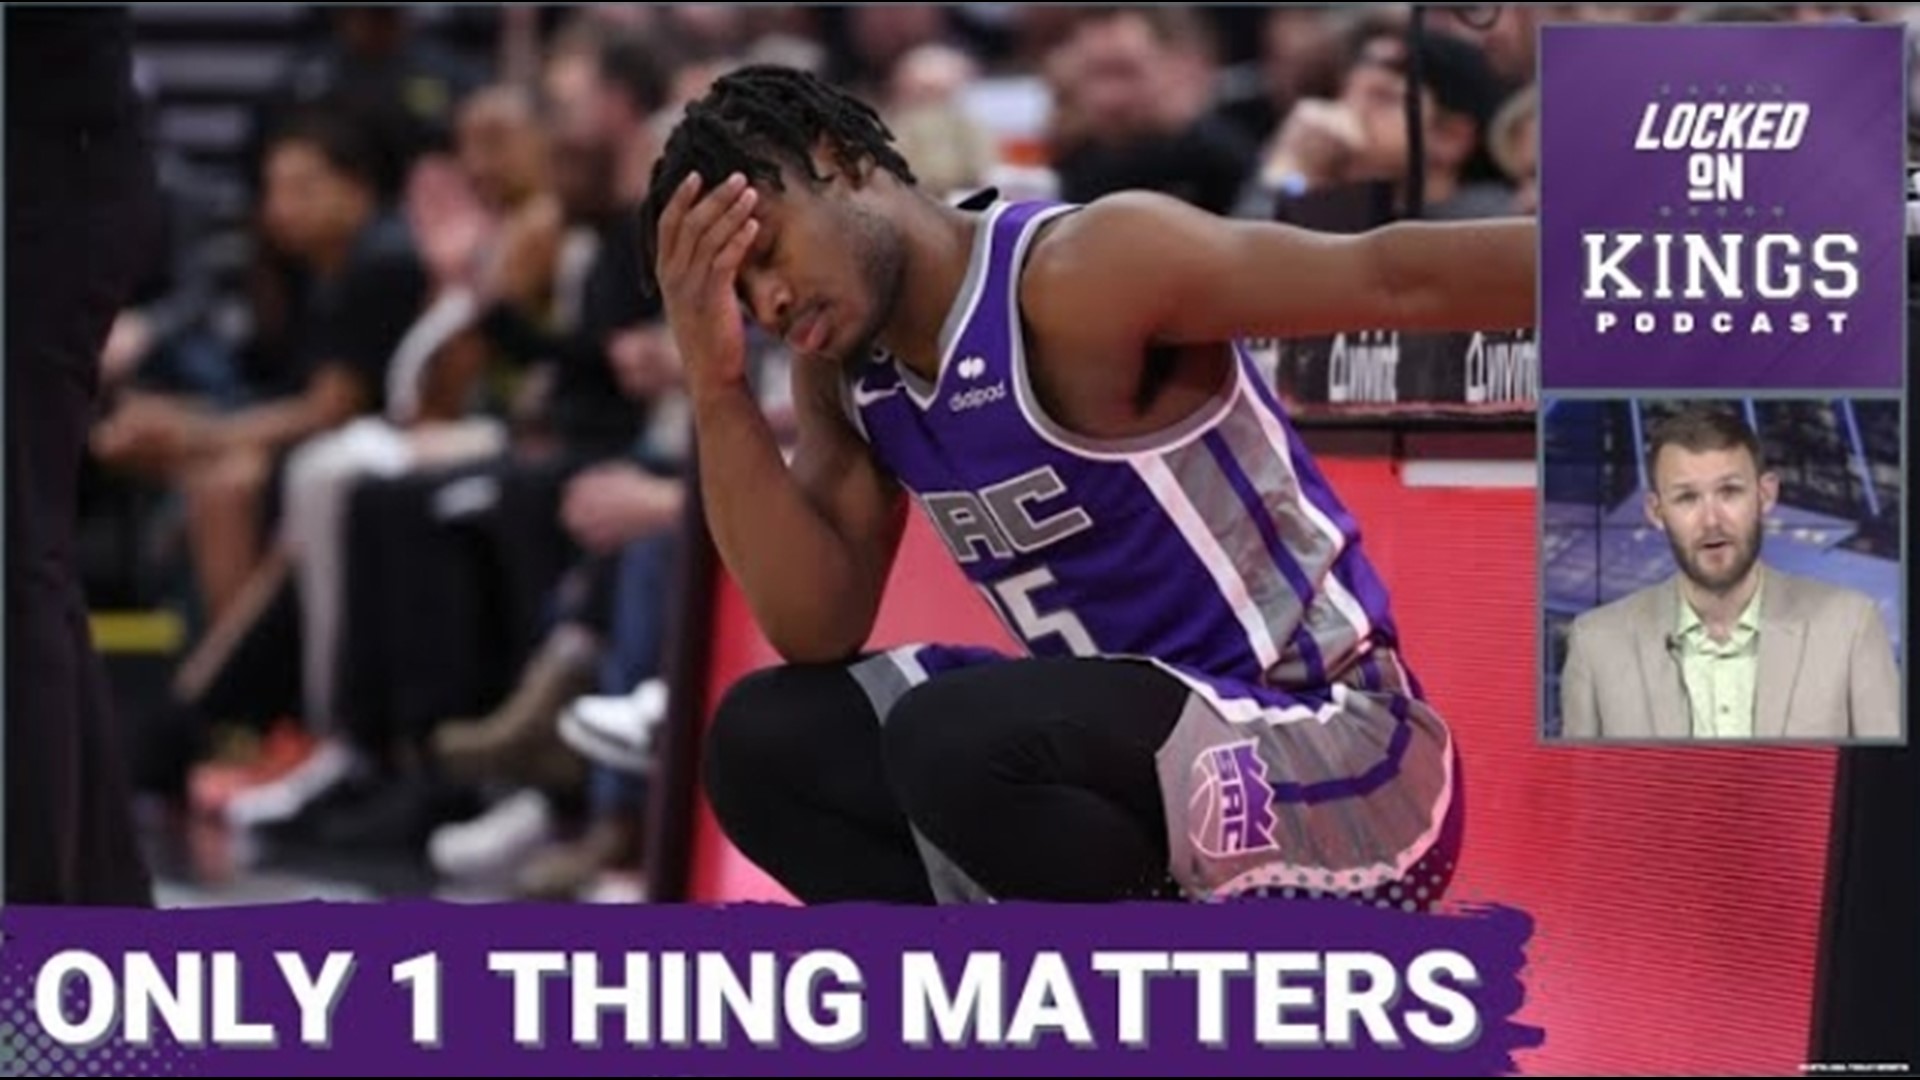 Matt George reacts to the surprising Kings loss to the shorthanded Jazz in Utah and shares what he believes is the one thing that should matter for the Kings.